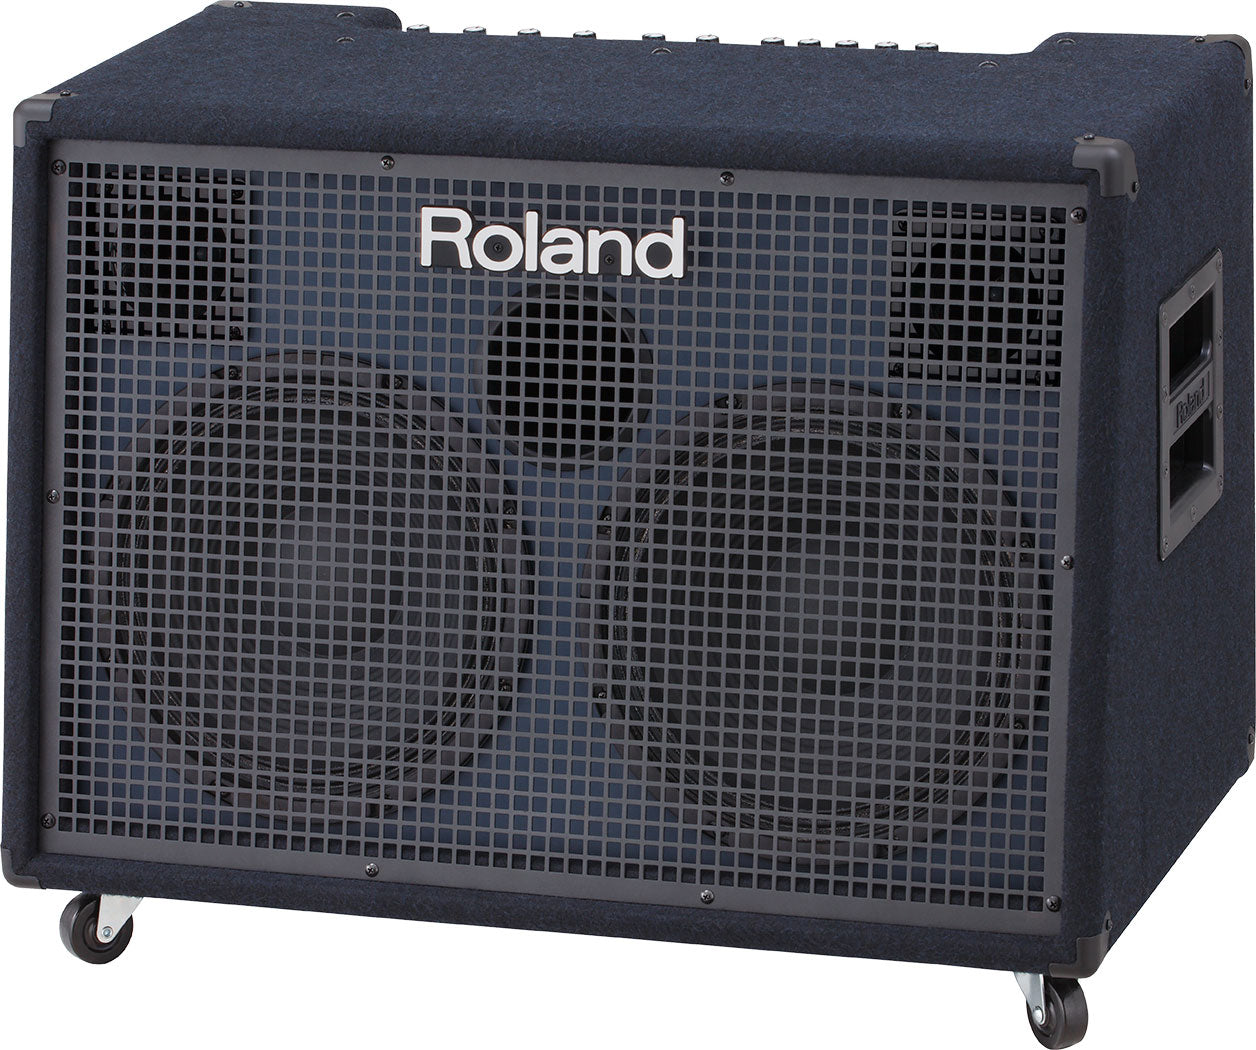 Roland KC-990 Stereo Mixing Keyboard Amplifier 鍵琴擴音器